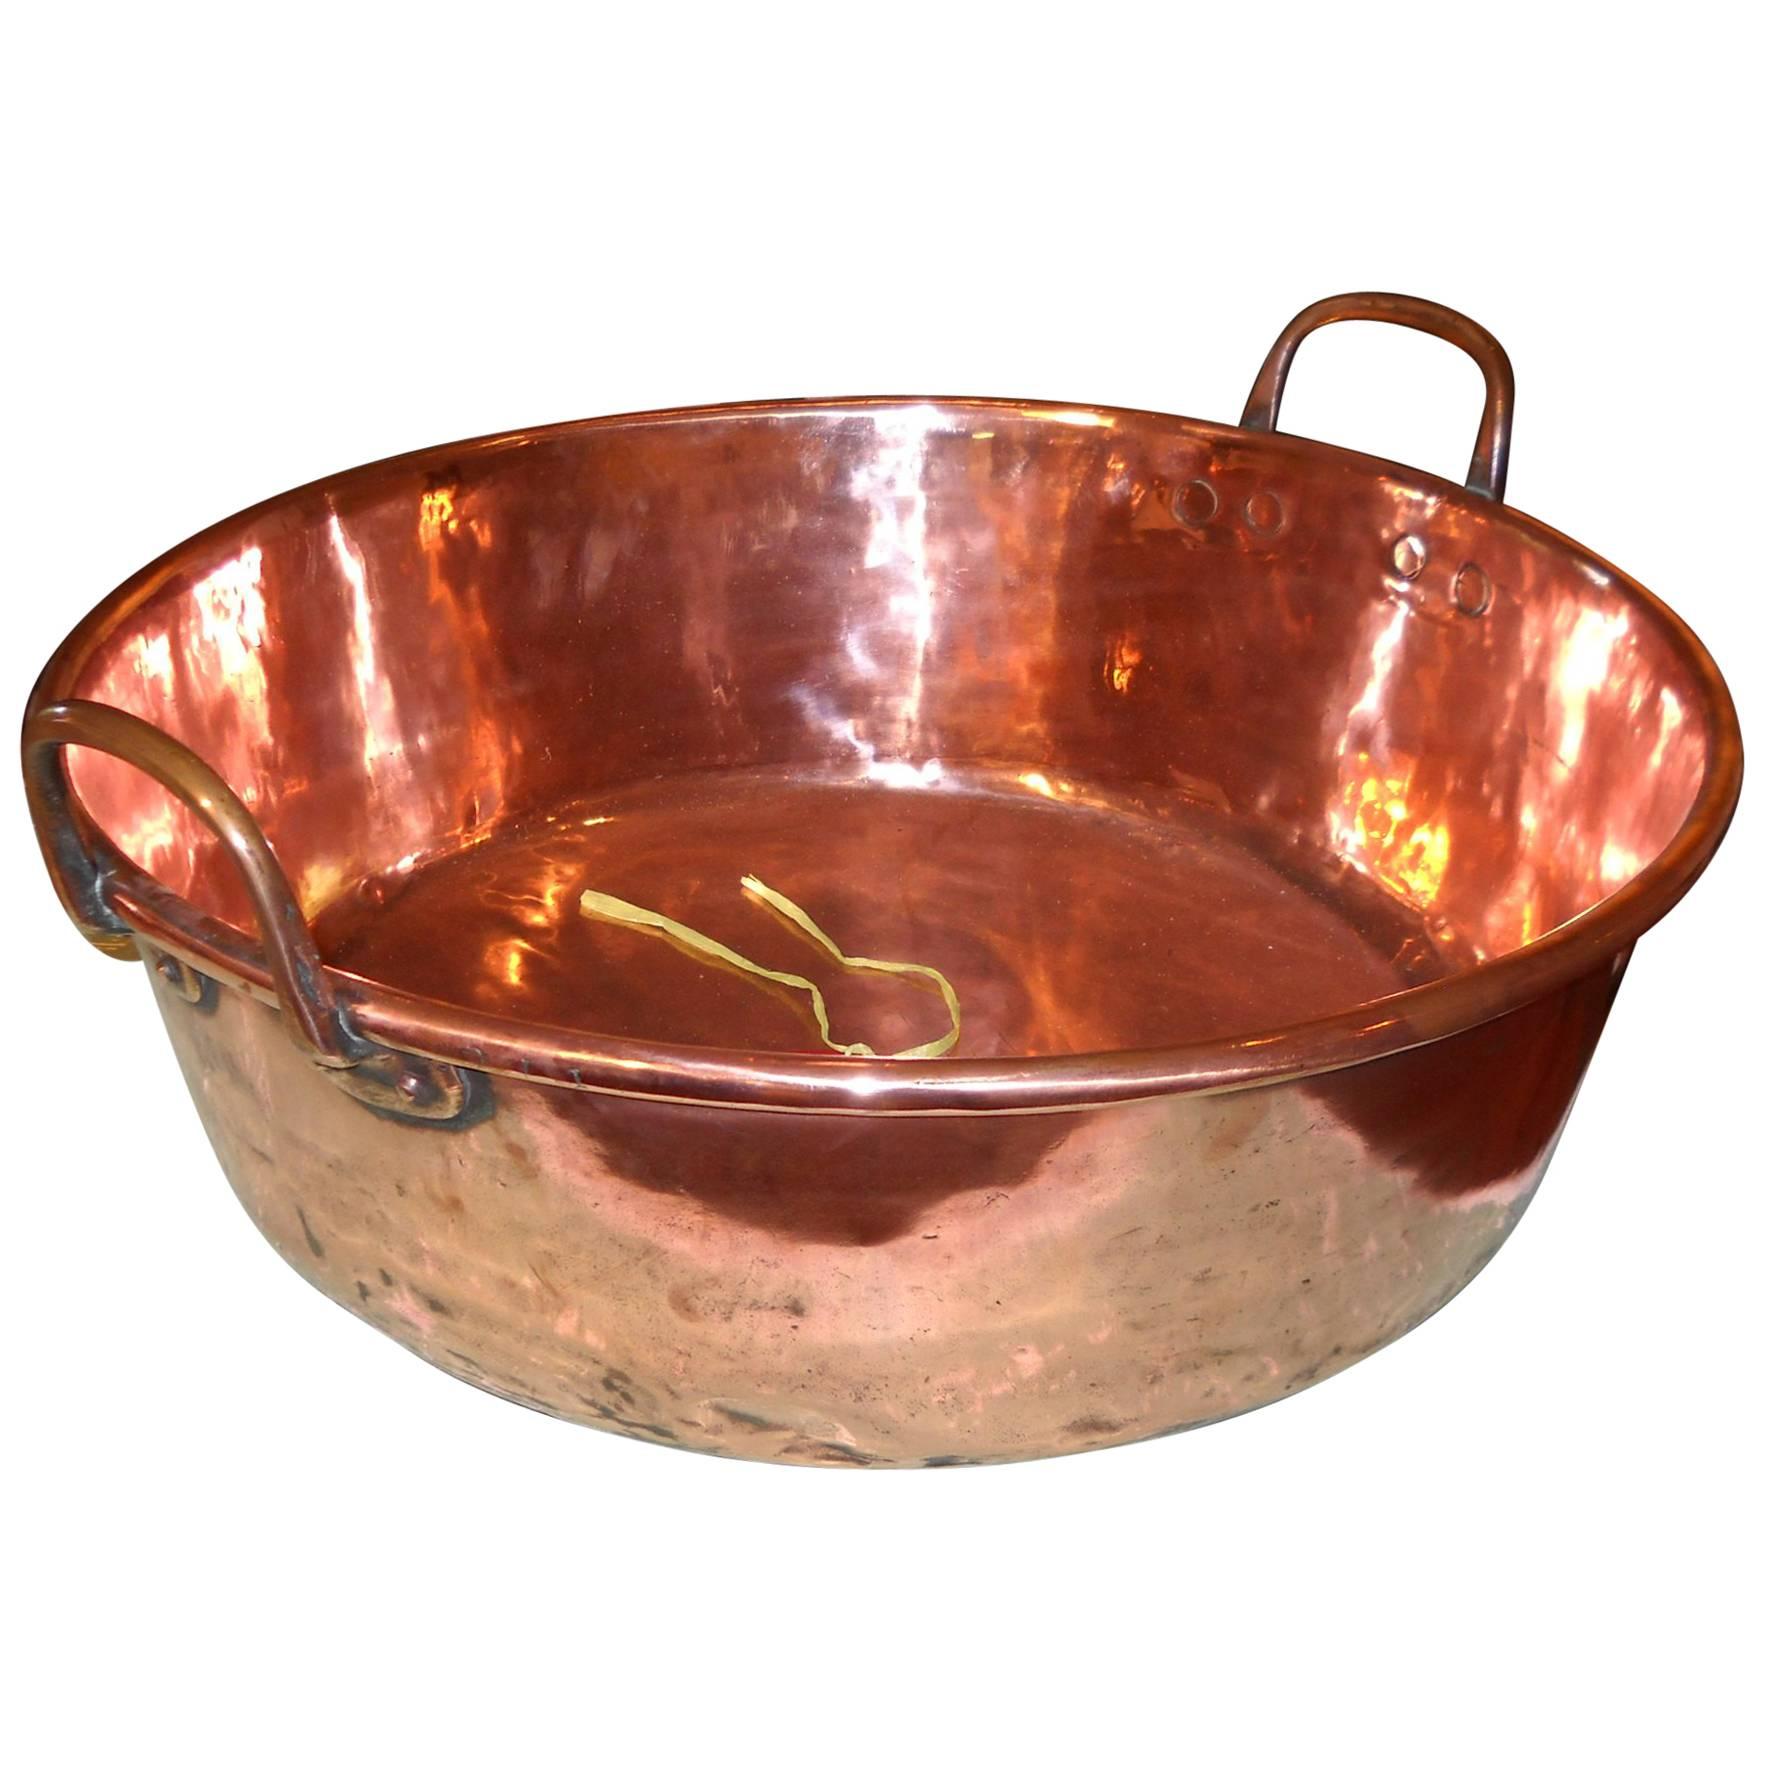 English Copper Pan with Handles